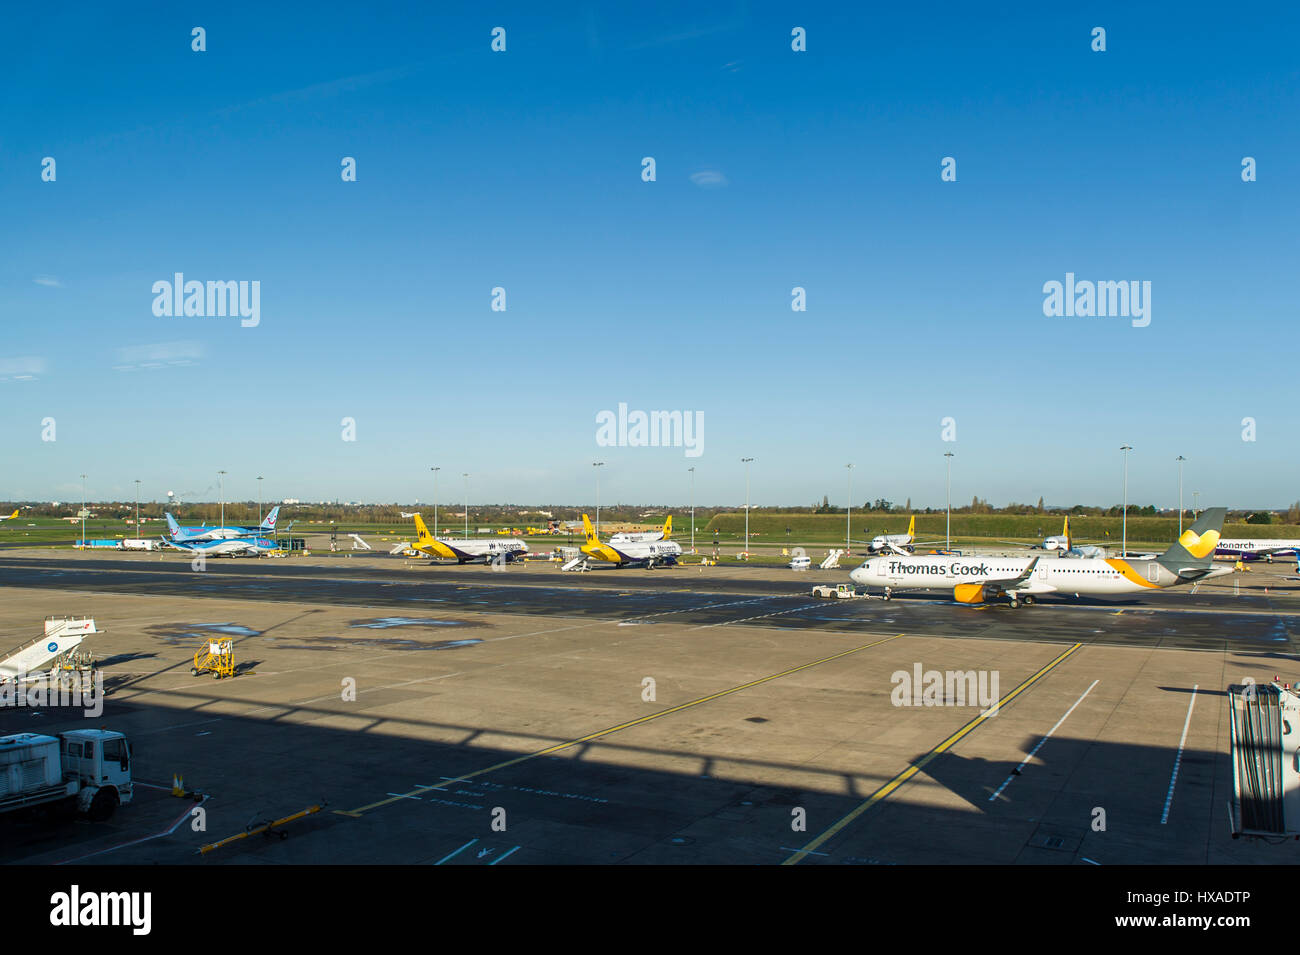 Monarch aircraft lined up at Birmingham Airport, UK. The airline has gone into administration which is the biggest ever UK airline failure. Stock Photo